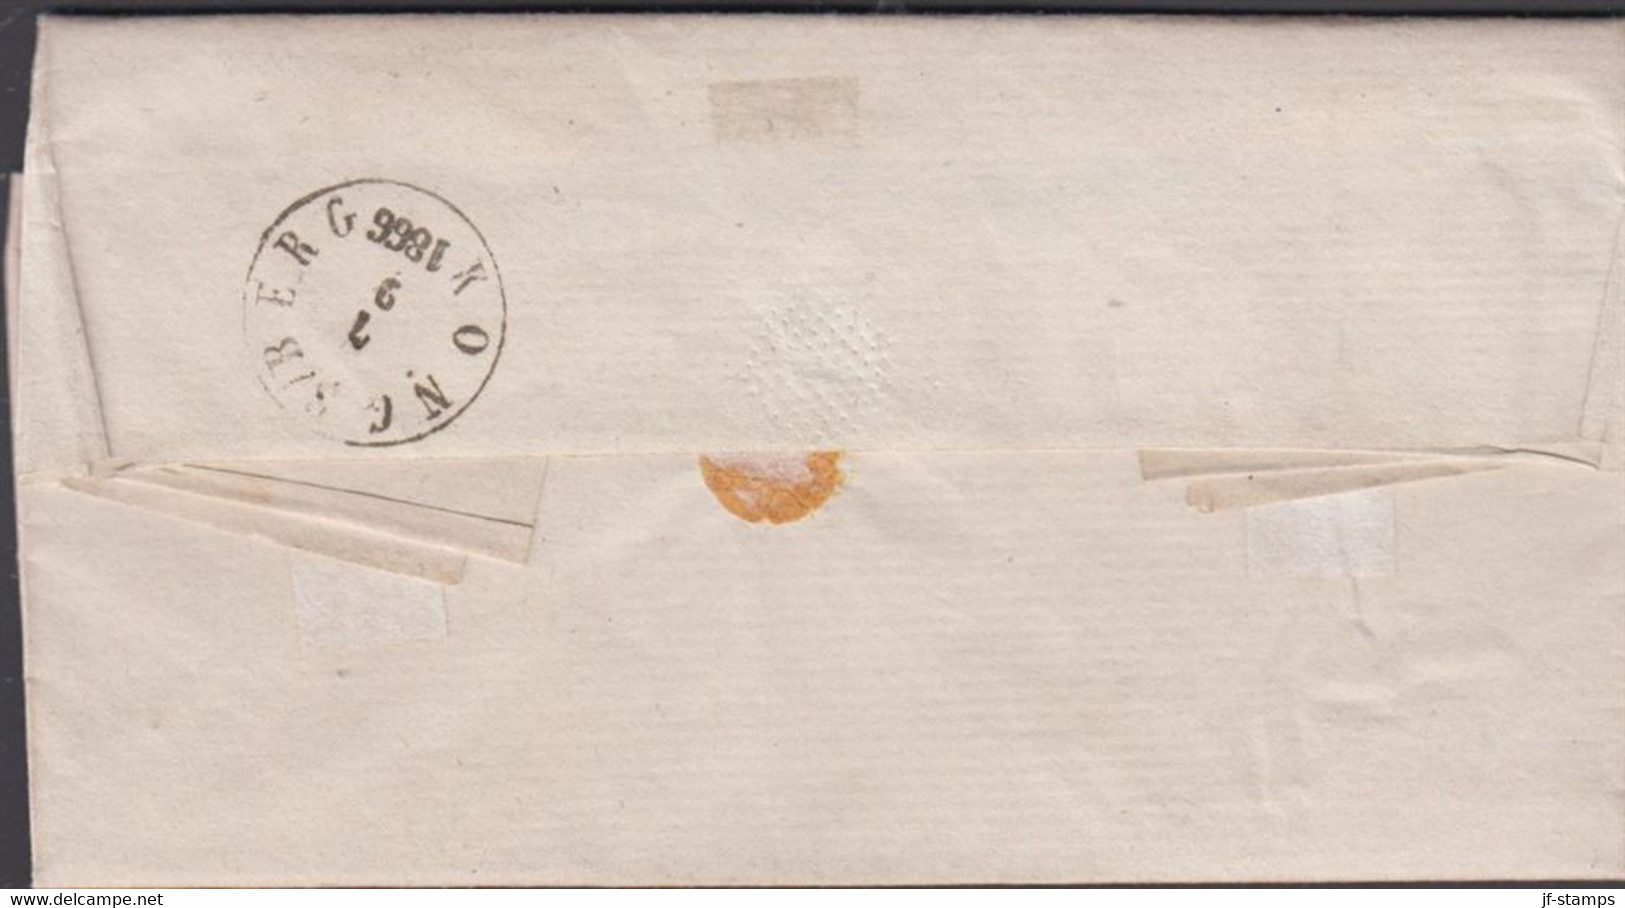 1866. NORGE. Small Cover To Nummedal Cancelled CHRISTIANIA 5 9 1866 + Reverse Transit Cancel KONGSBERG 7 9... - JF427628 - ...-1855 Prephilately